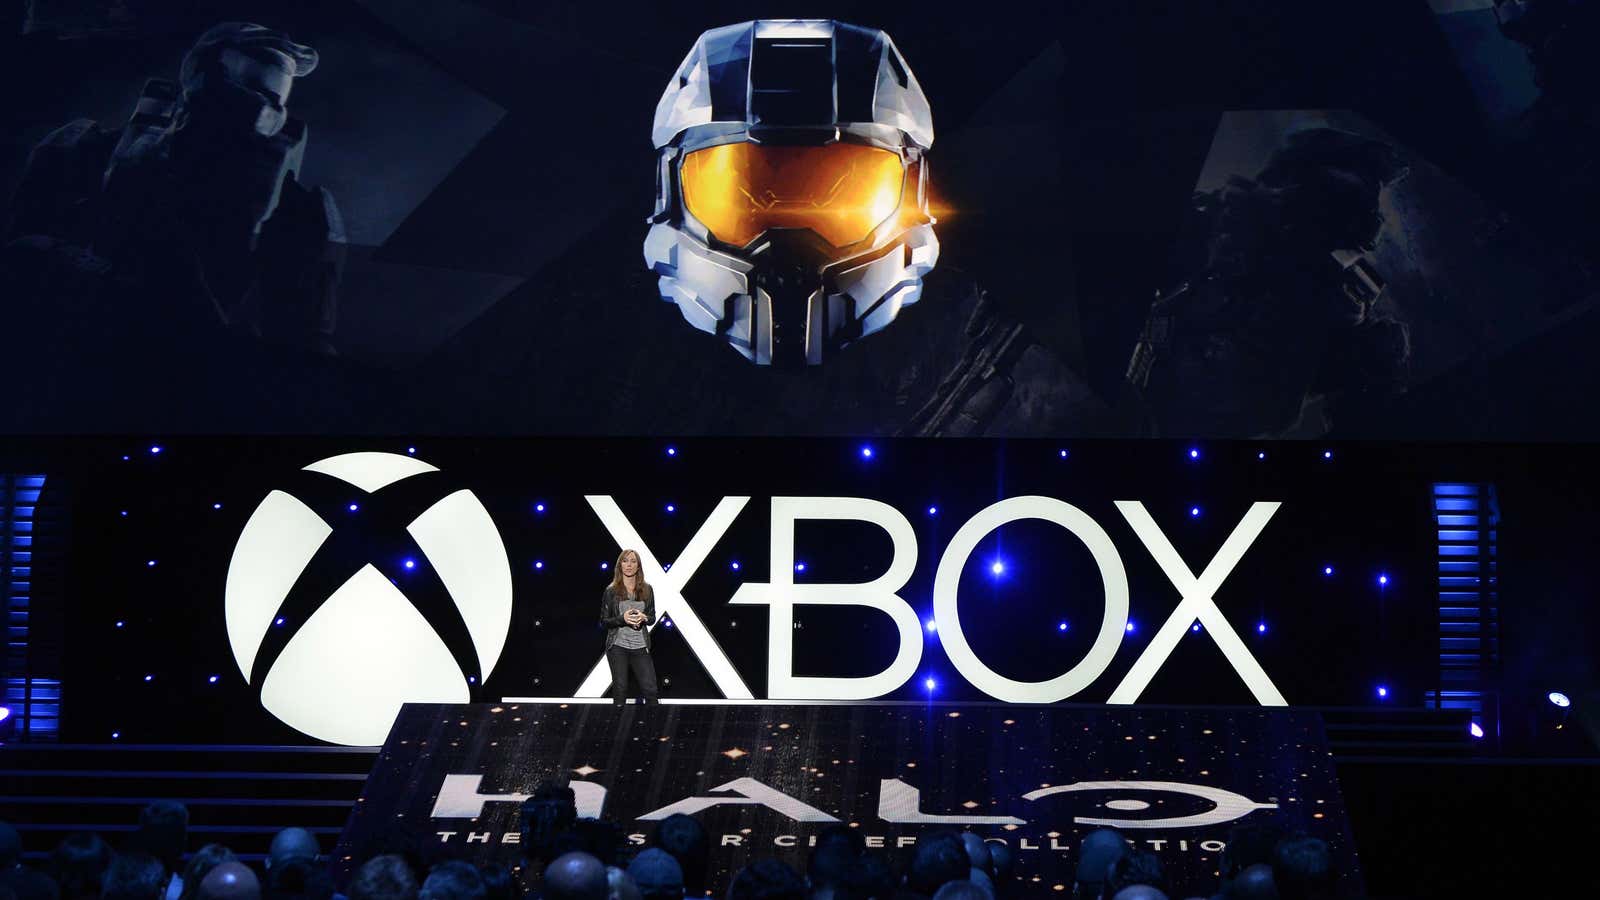 Master Chief managed to survive the elimination of Xbox Entertainment Studios.